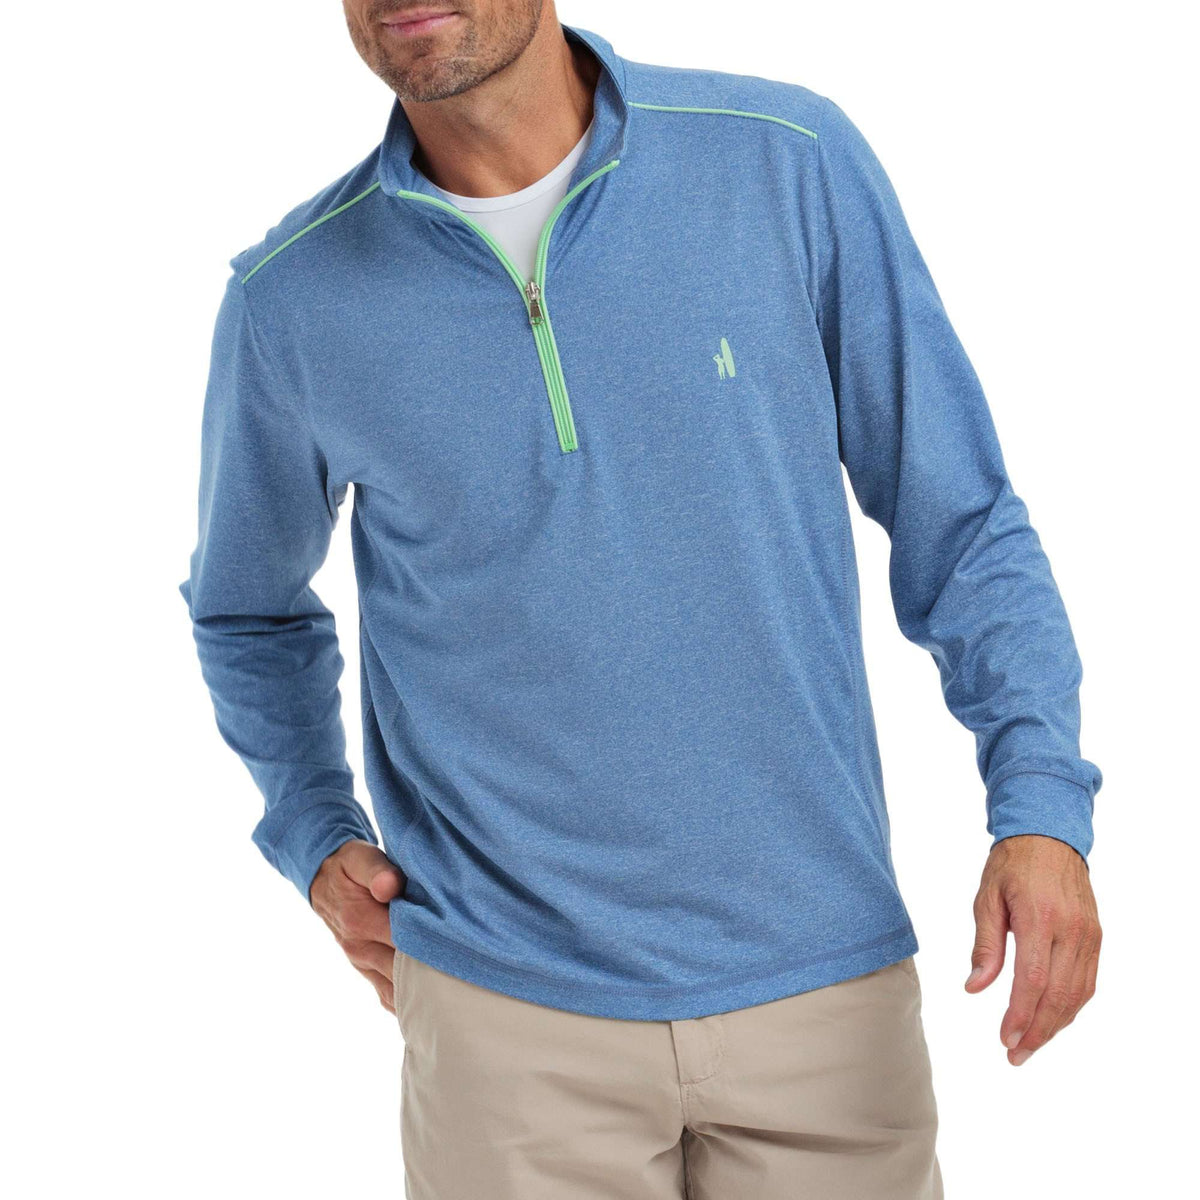 Lammie 1/4 Zip "Prep-formance" Pullover in Riptide by Johnnie-O - Country Club Prep